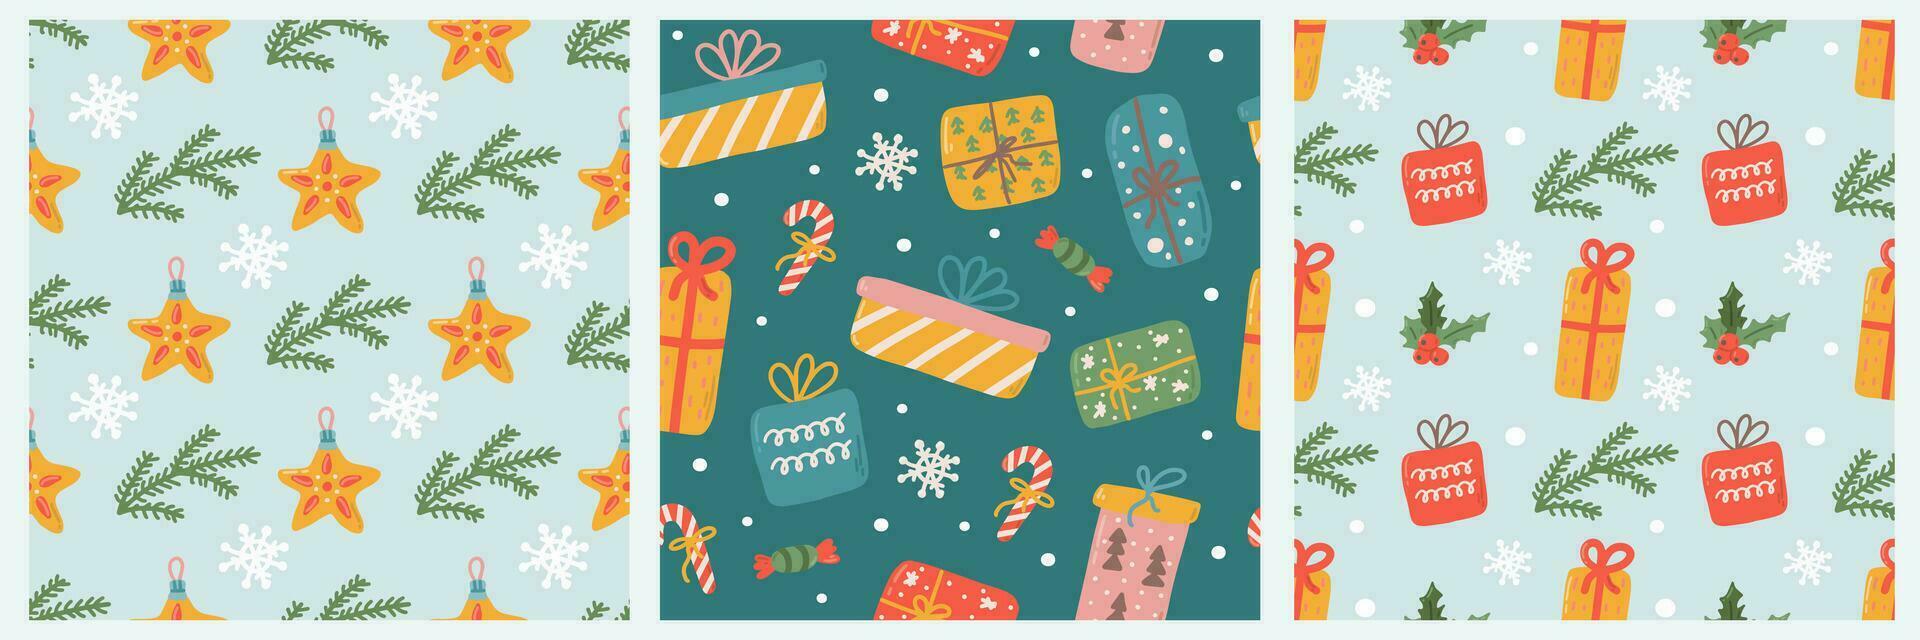 Set of Christmas and Happy New Year seamless patterns, gift boxes, candies, spruce twigs. Vector holiday background